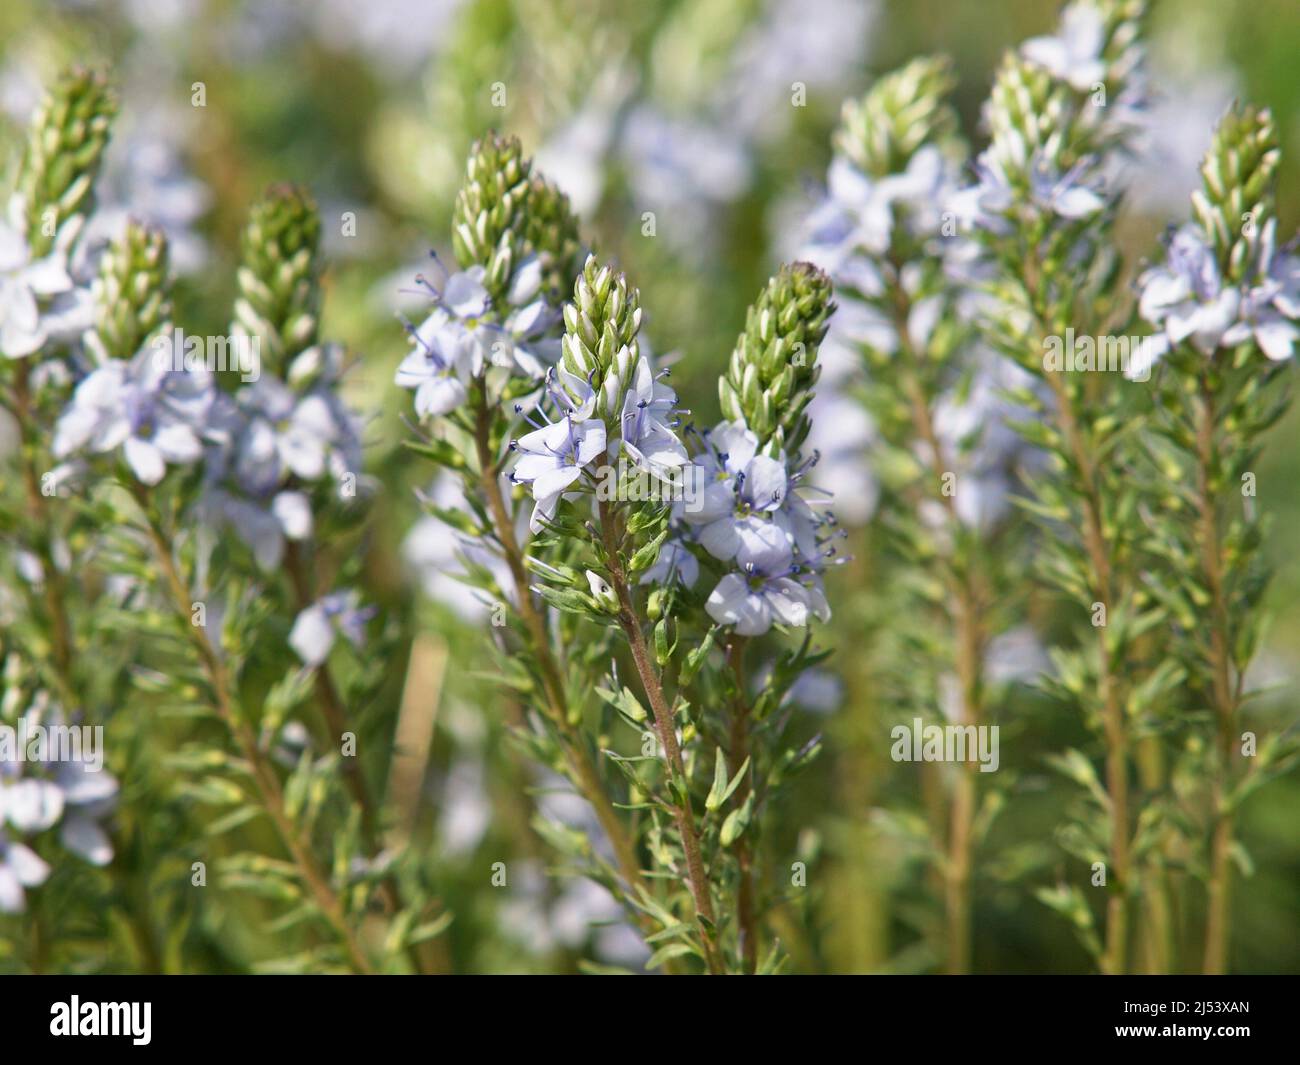 Prostrate speedwell or rock speedwell with pale blue flower, Veronica prostrata Stock Photo